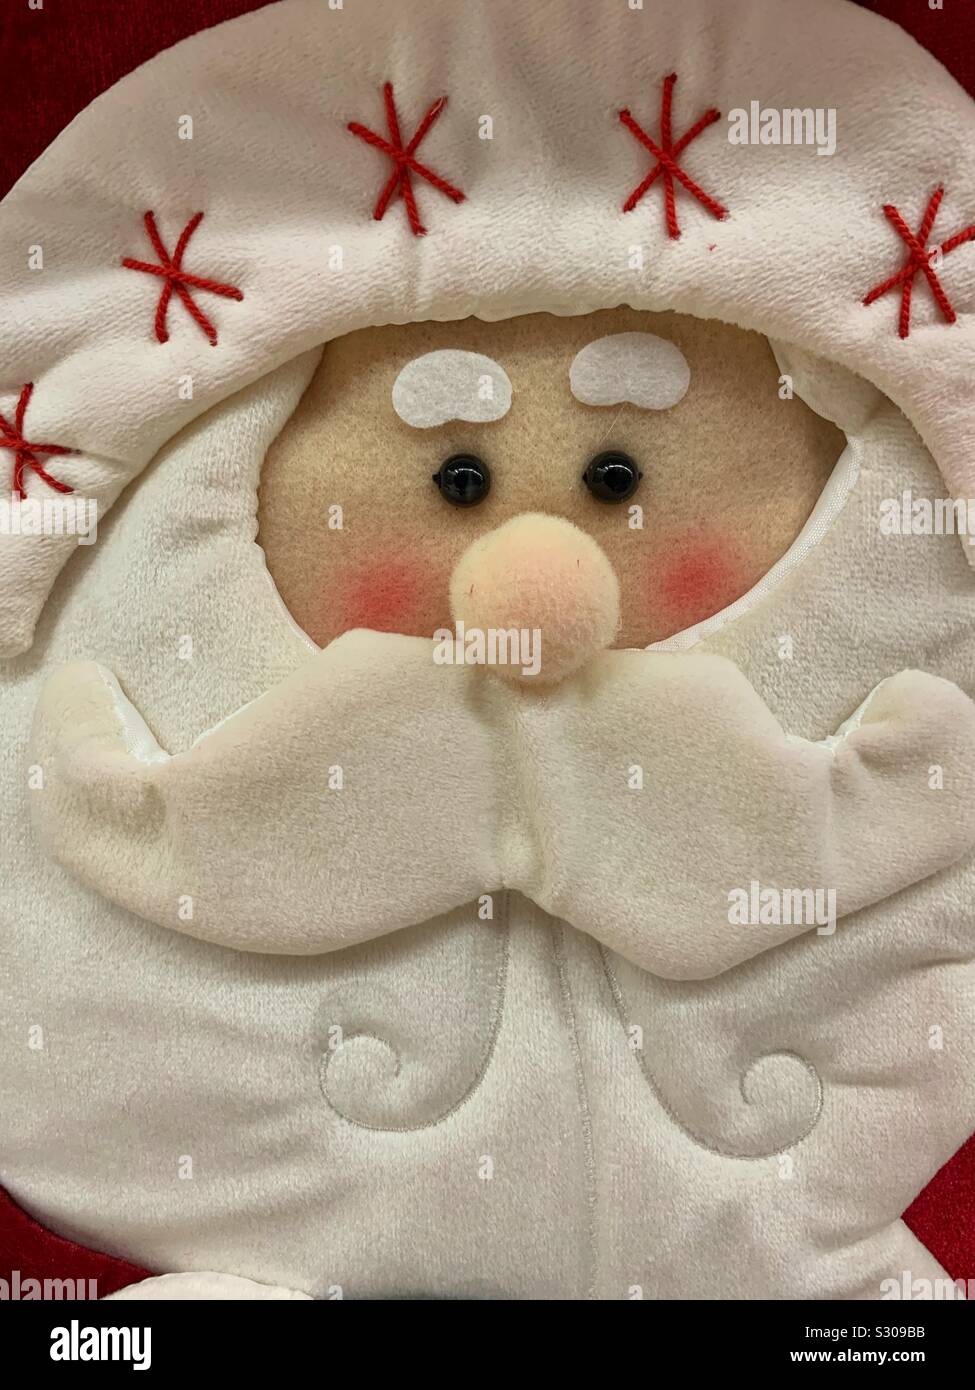 Crafty fabric Santa Claus face made out of felt material Stock Photo